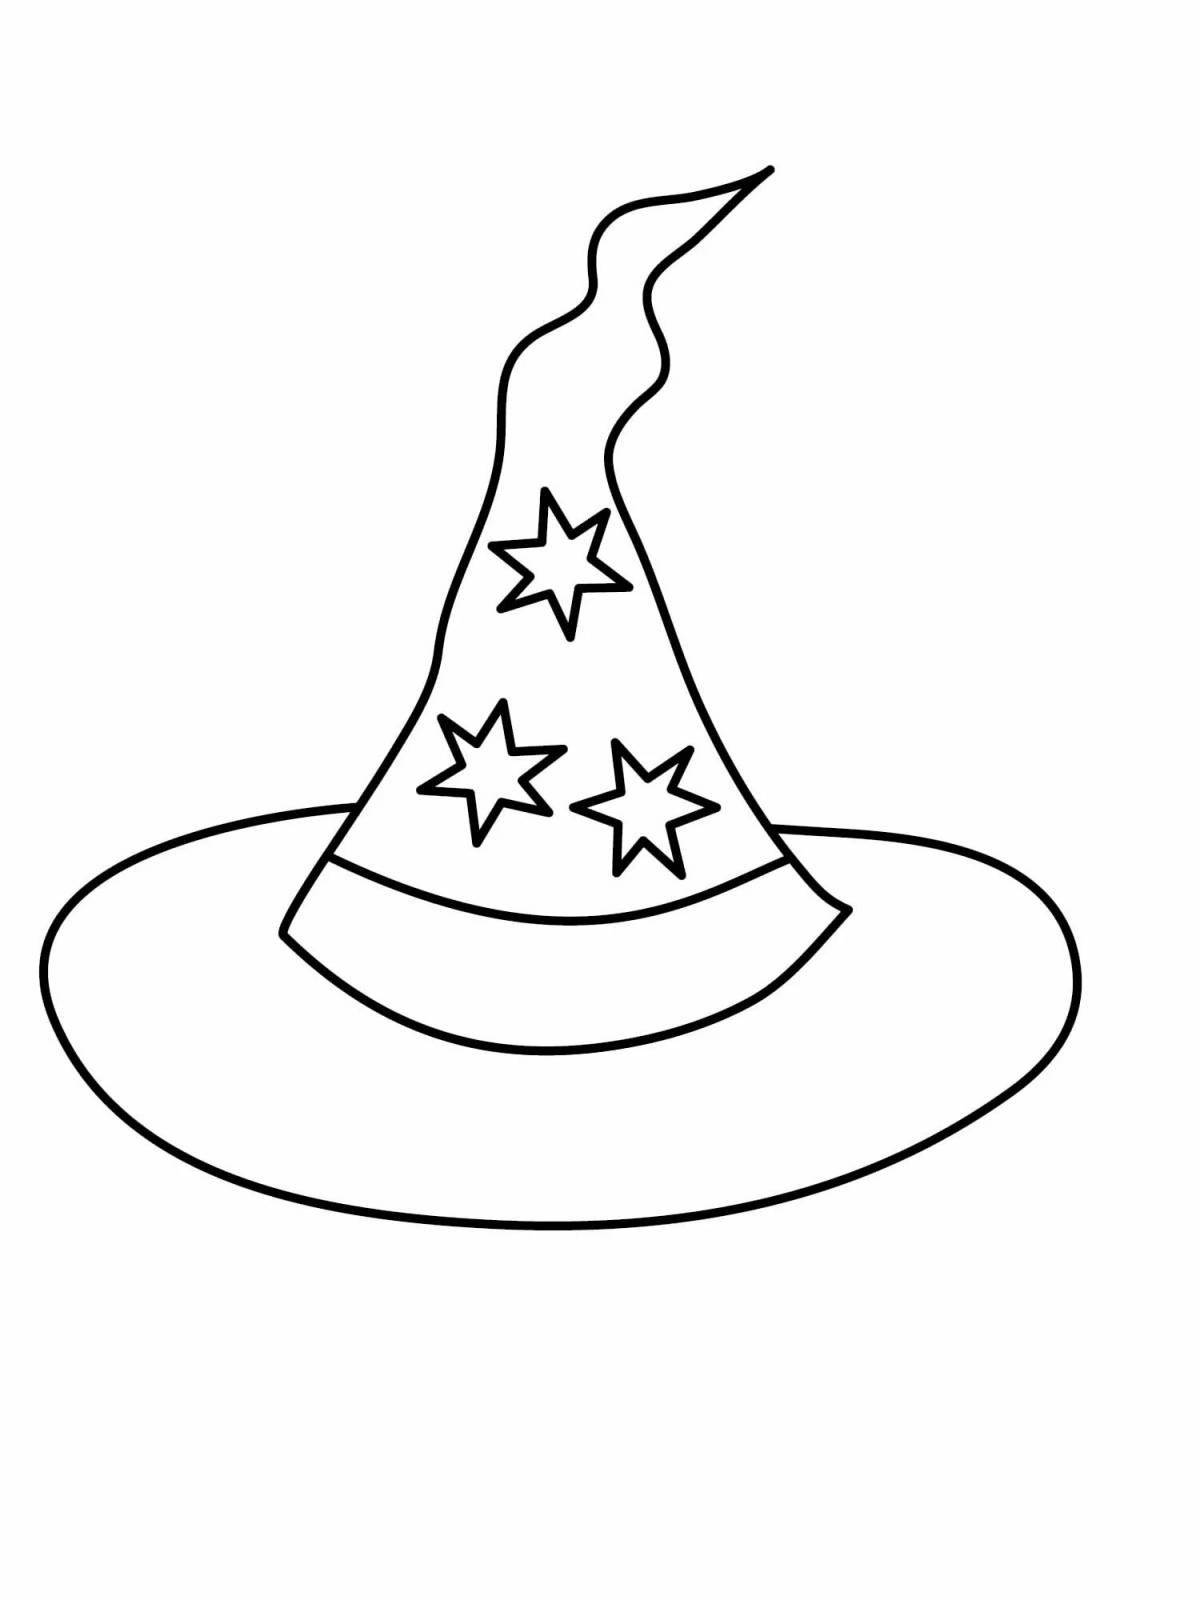 Coloring page playful wizard hat